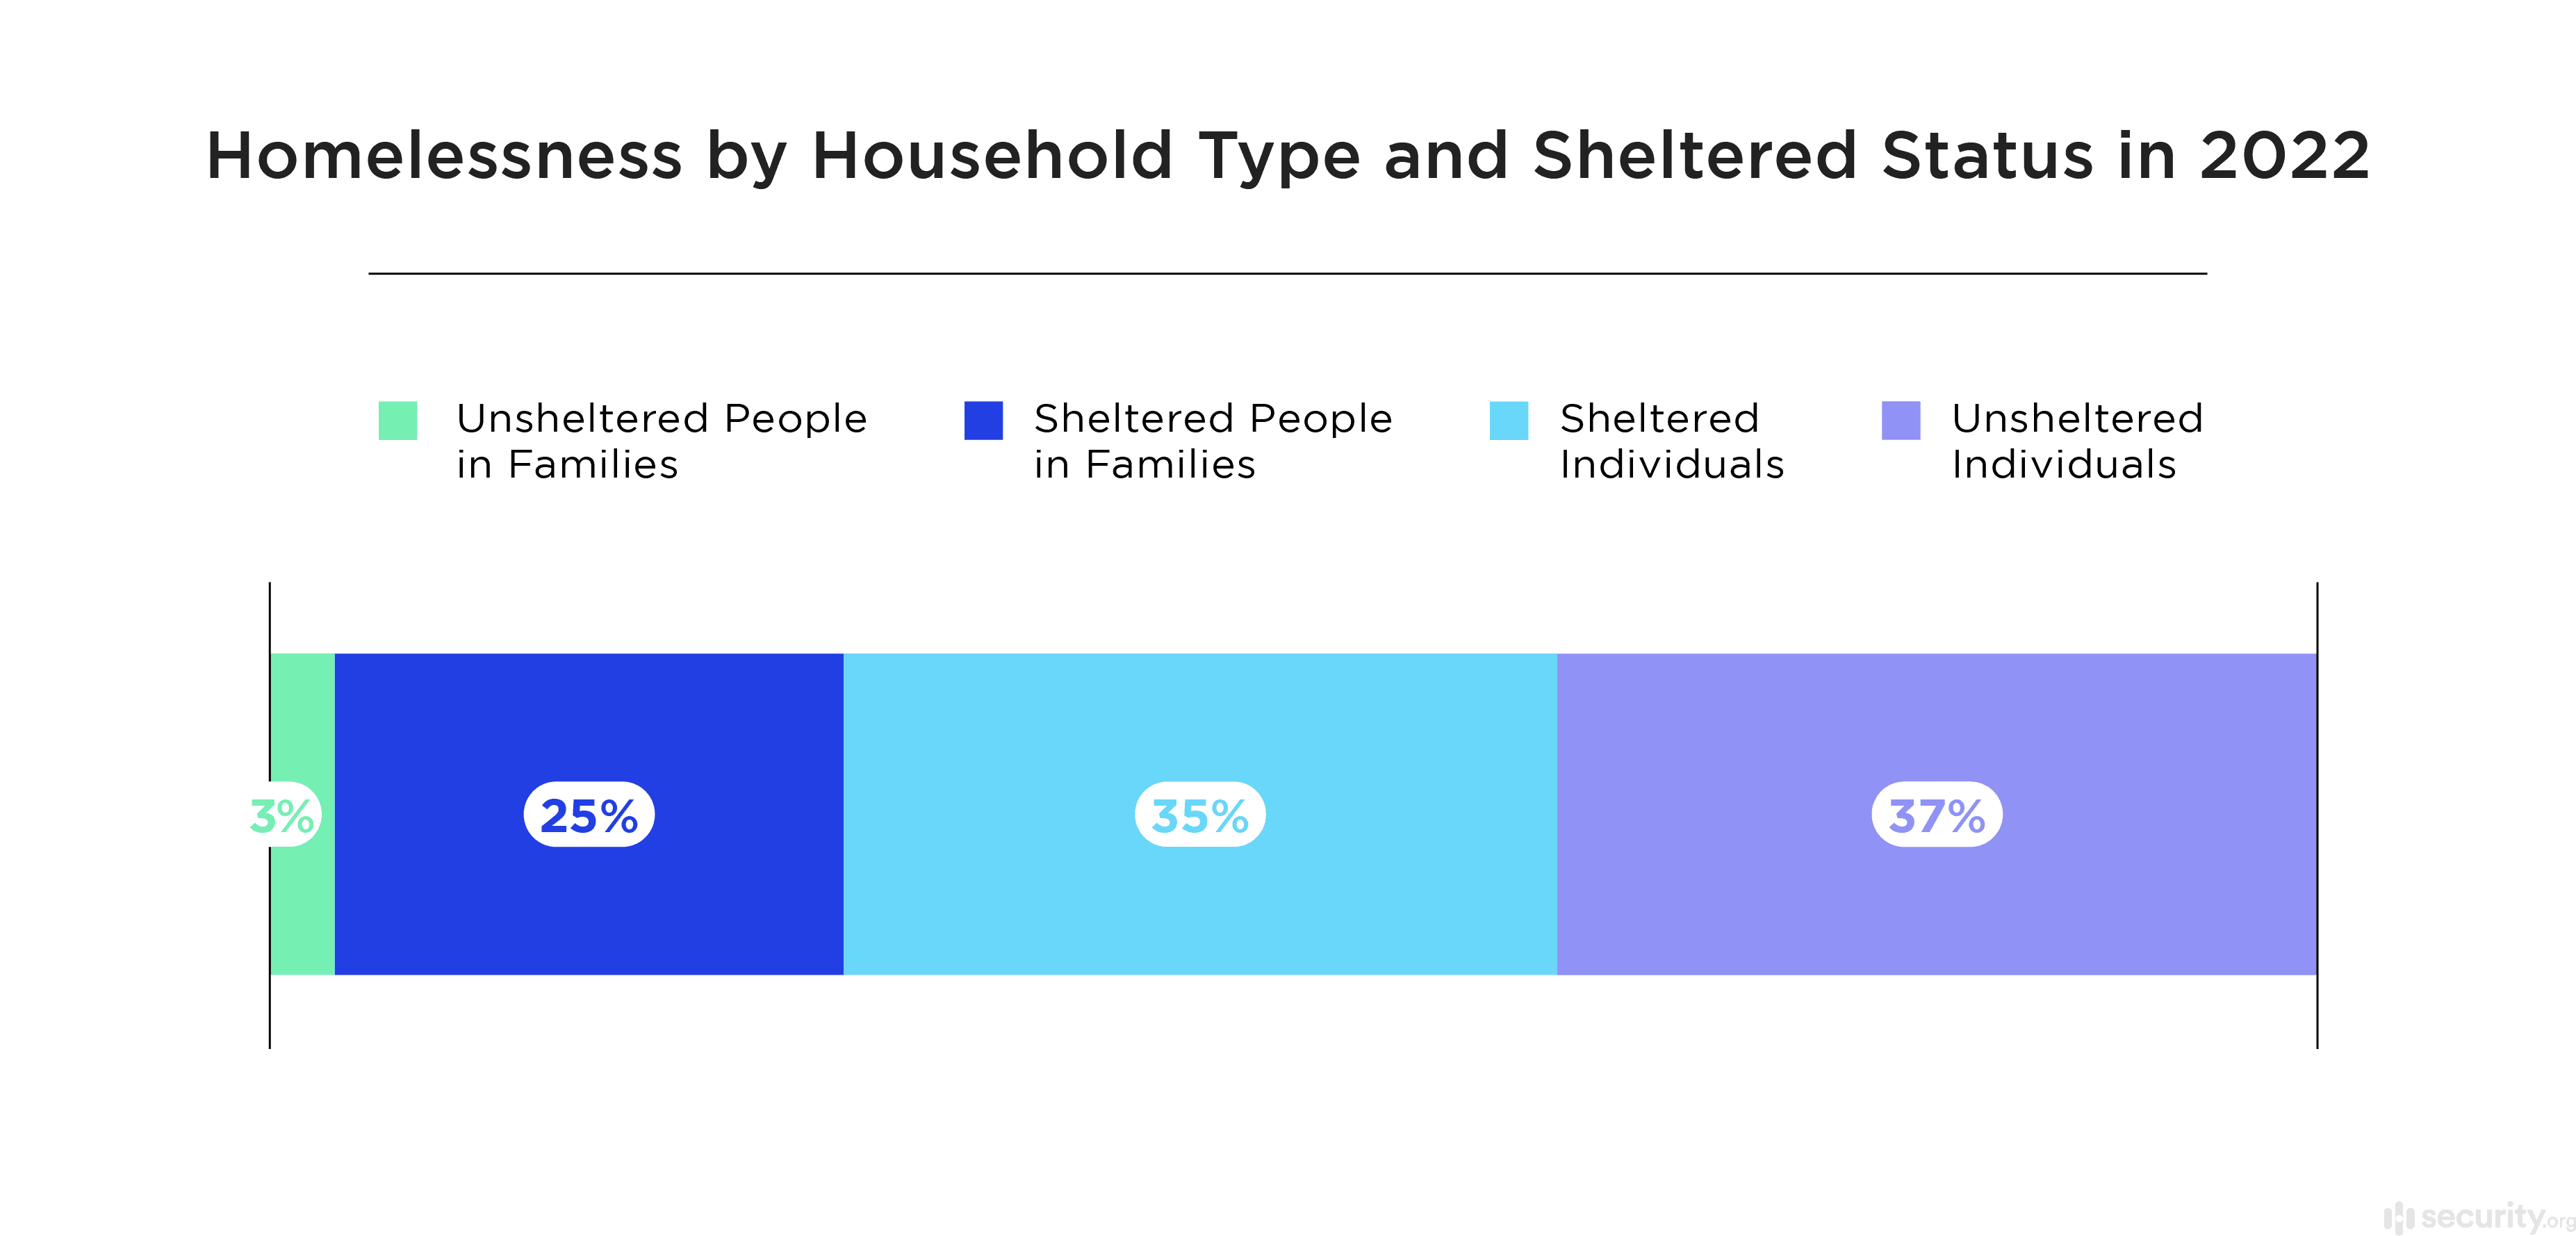 Homelessness by Household Type and Sheltered Status in 2022